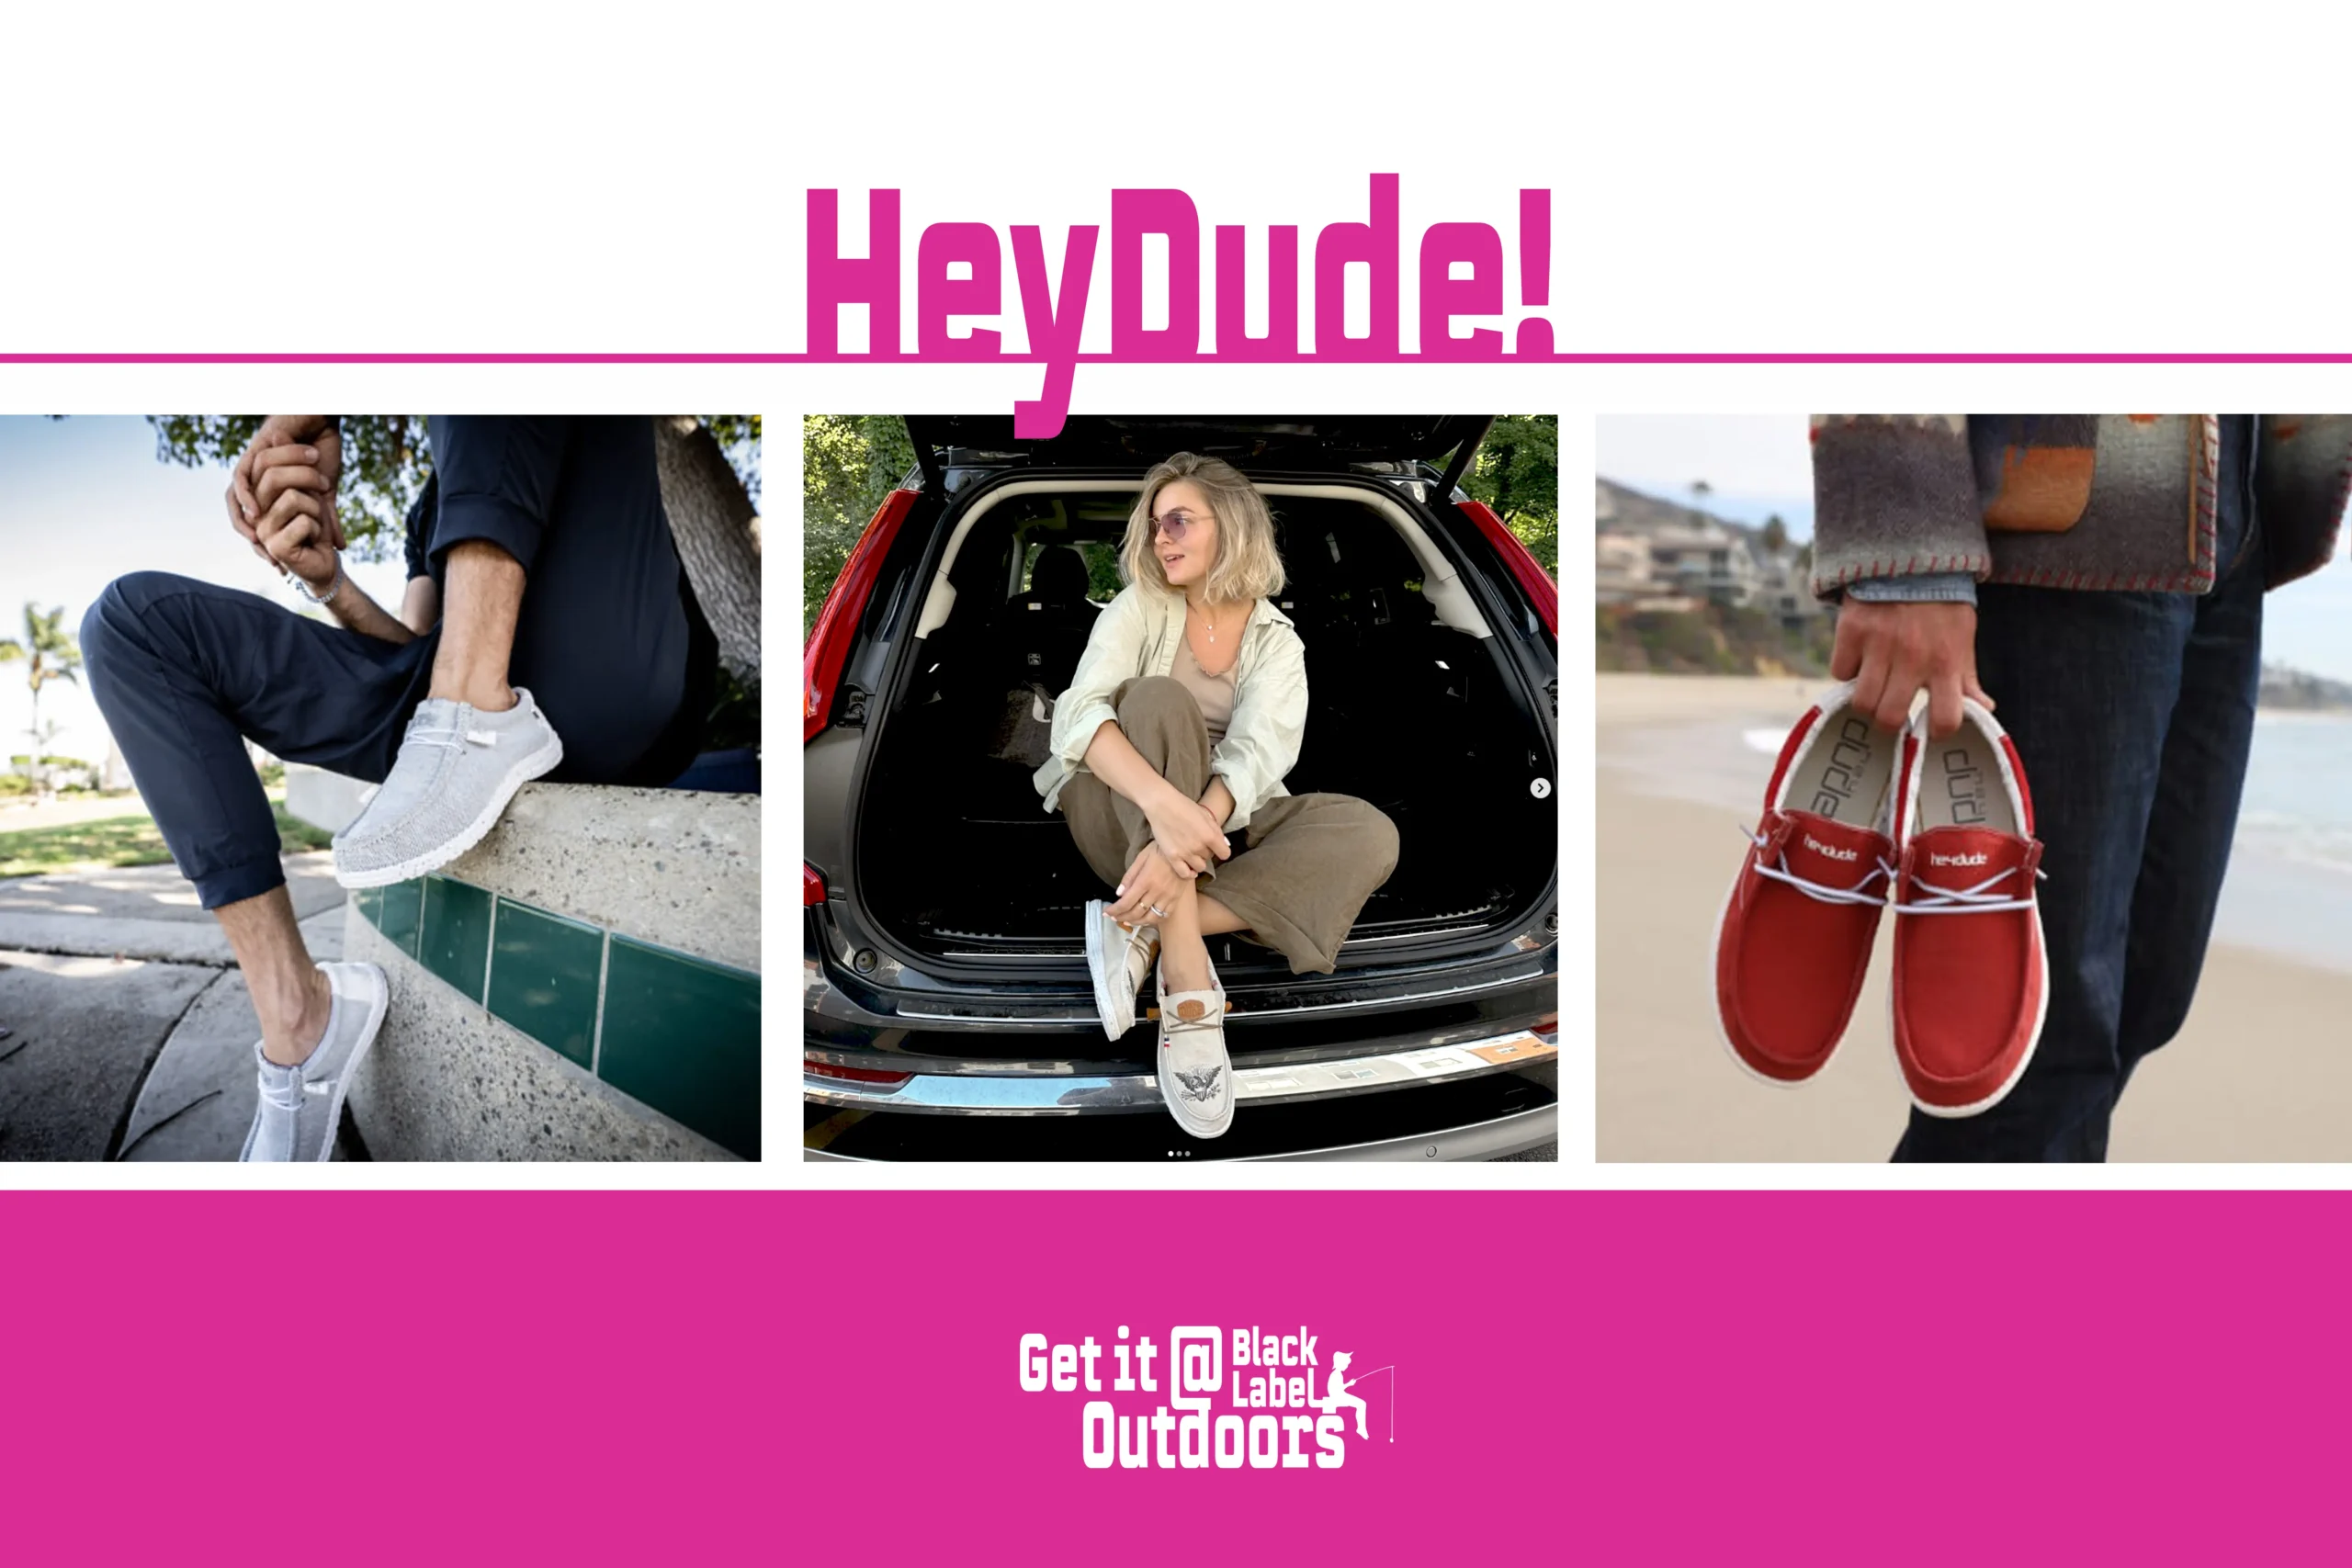 Hey Dude Brand Boat Shoes for Men and Women for Sale Filmstrip Header RGB